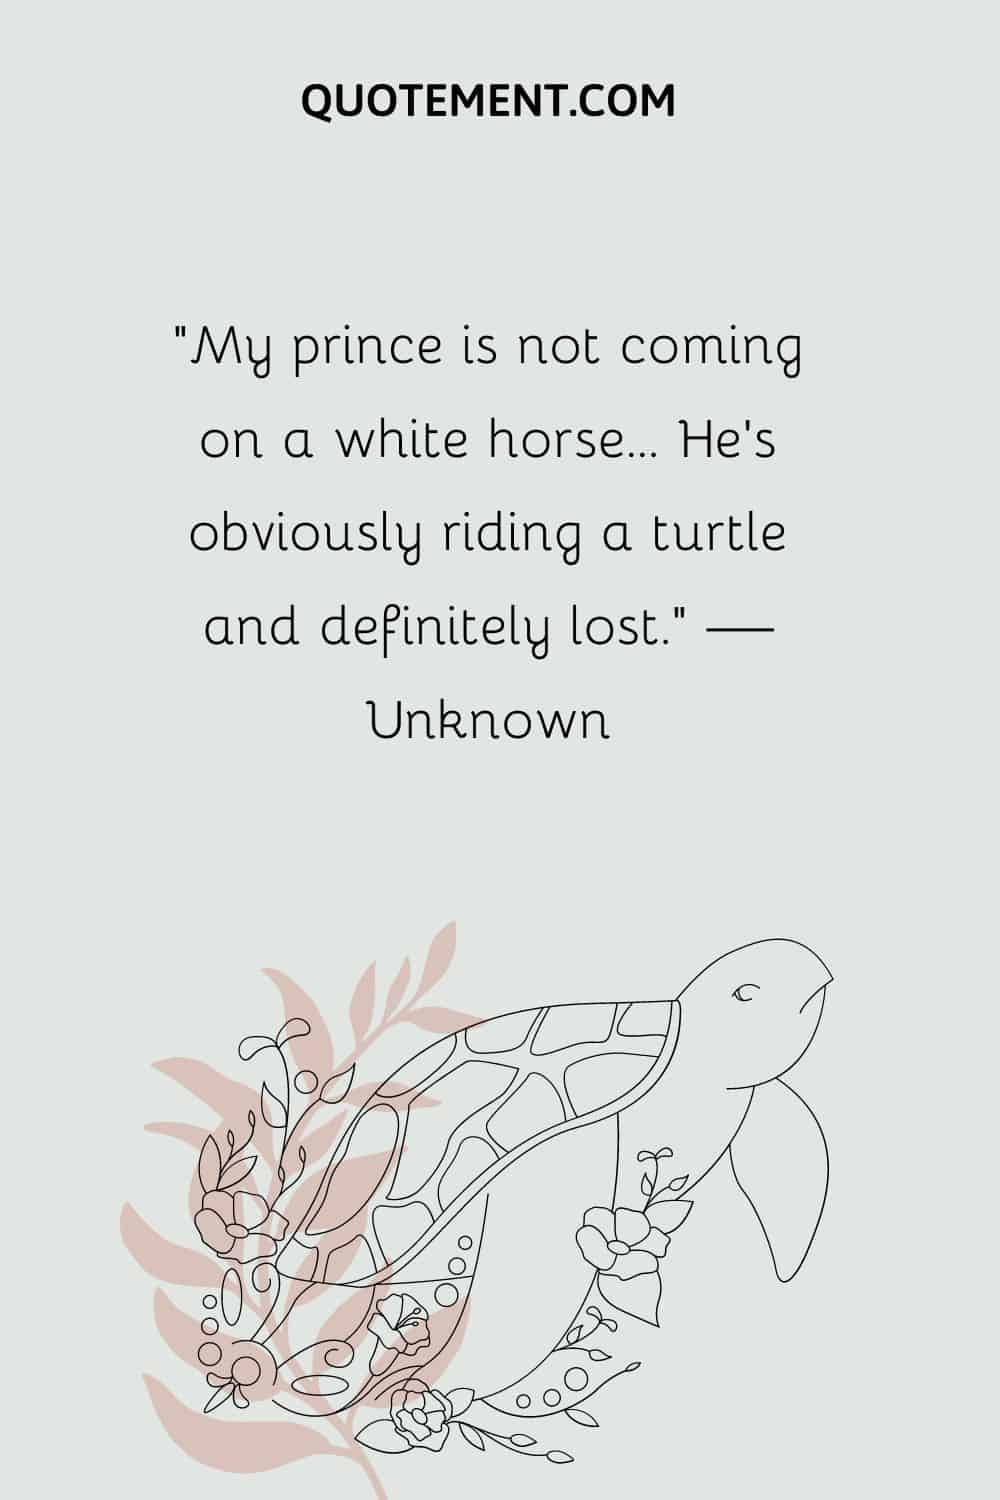 My prince is not coming on a white horse... He's obviously riding a turtle and definitely lost